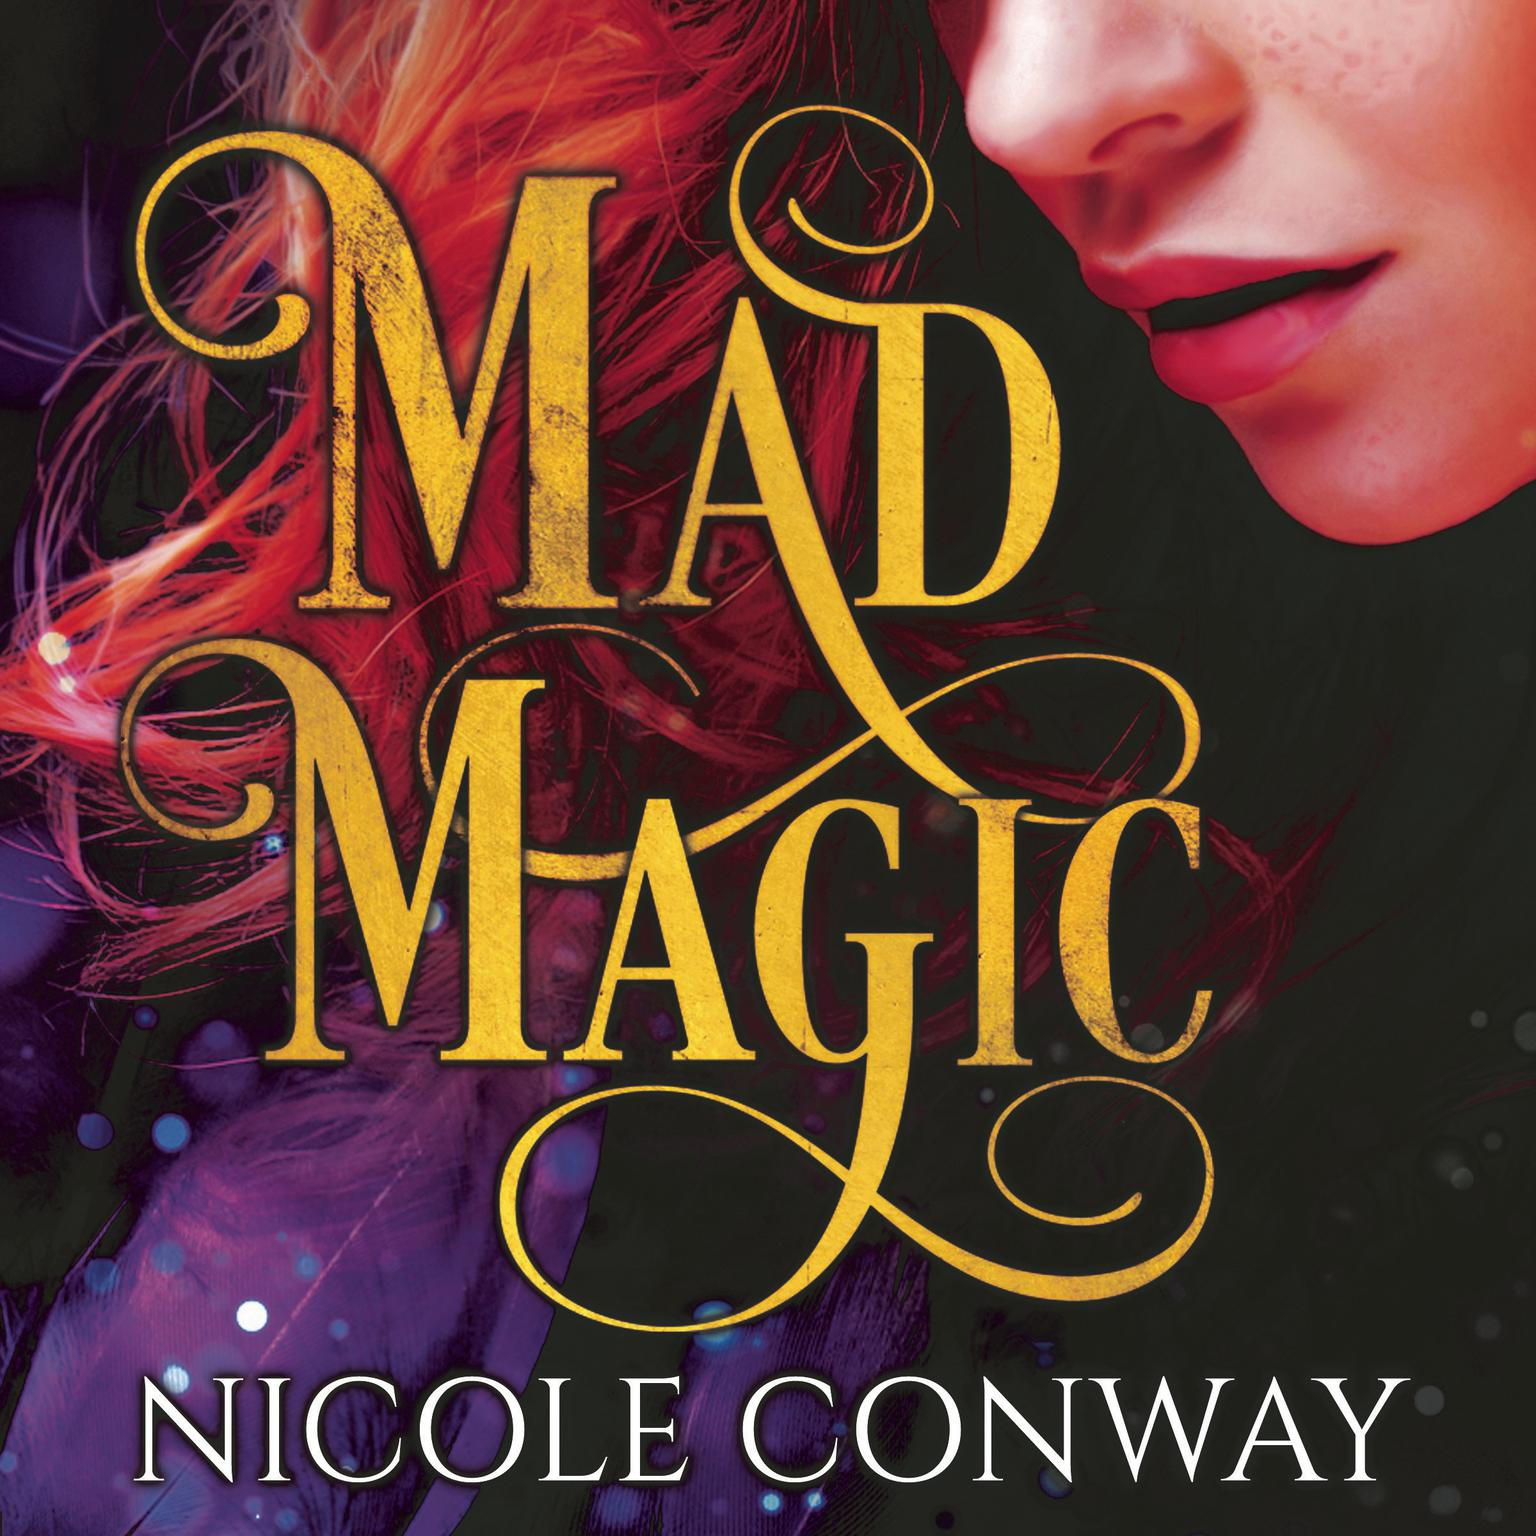 Mad Magic Audiobook, by Nicole Conway